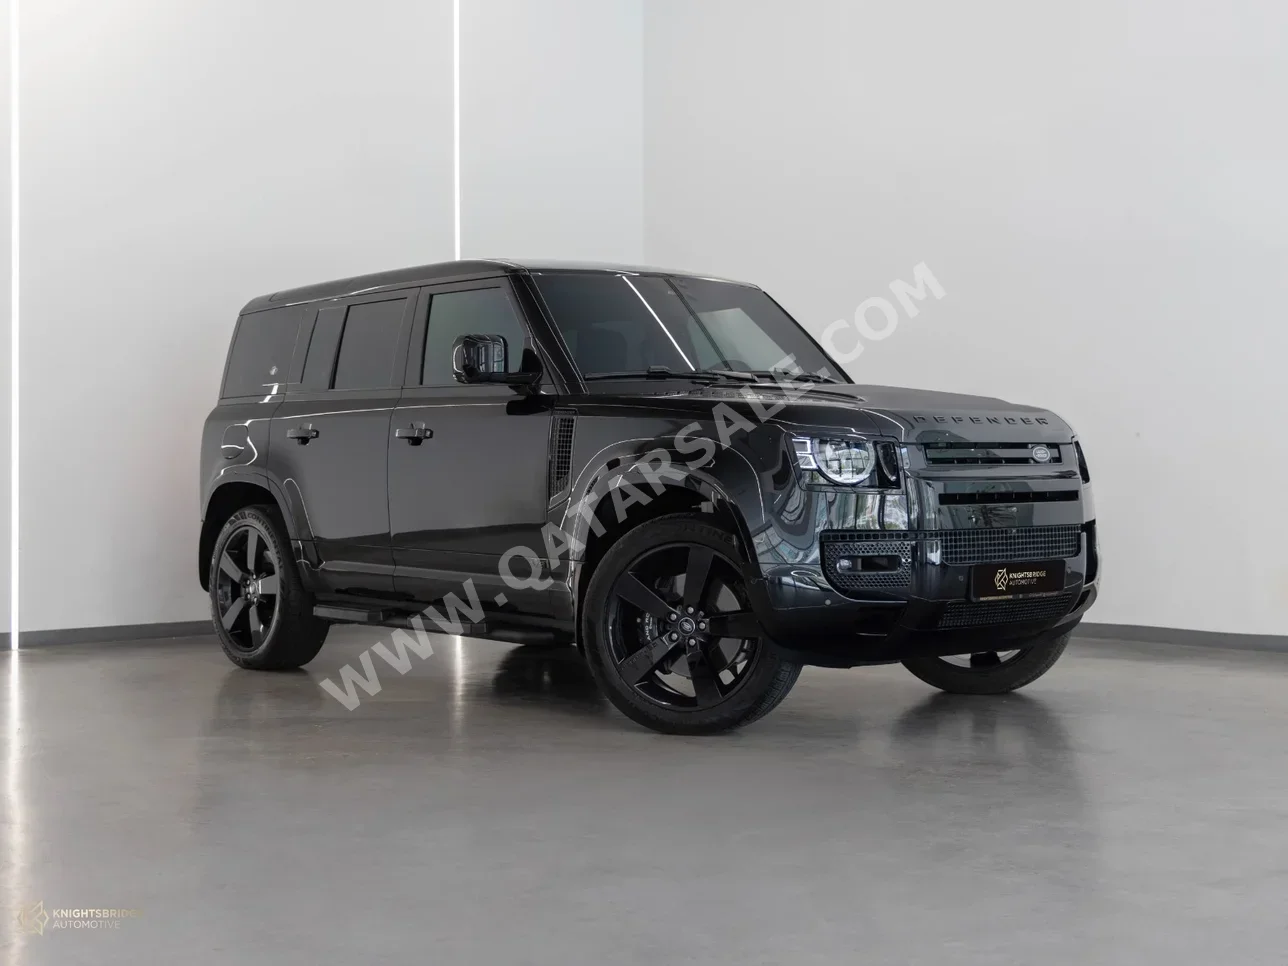 Land Rover  Defender  110 X  2023  Automatic  9,400 Km  8 Cylinder  Four Wheel Drive (4WD)  SUV  Black  With Warranty